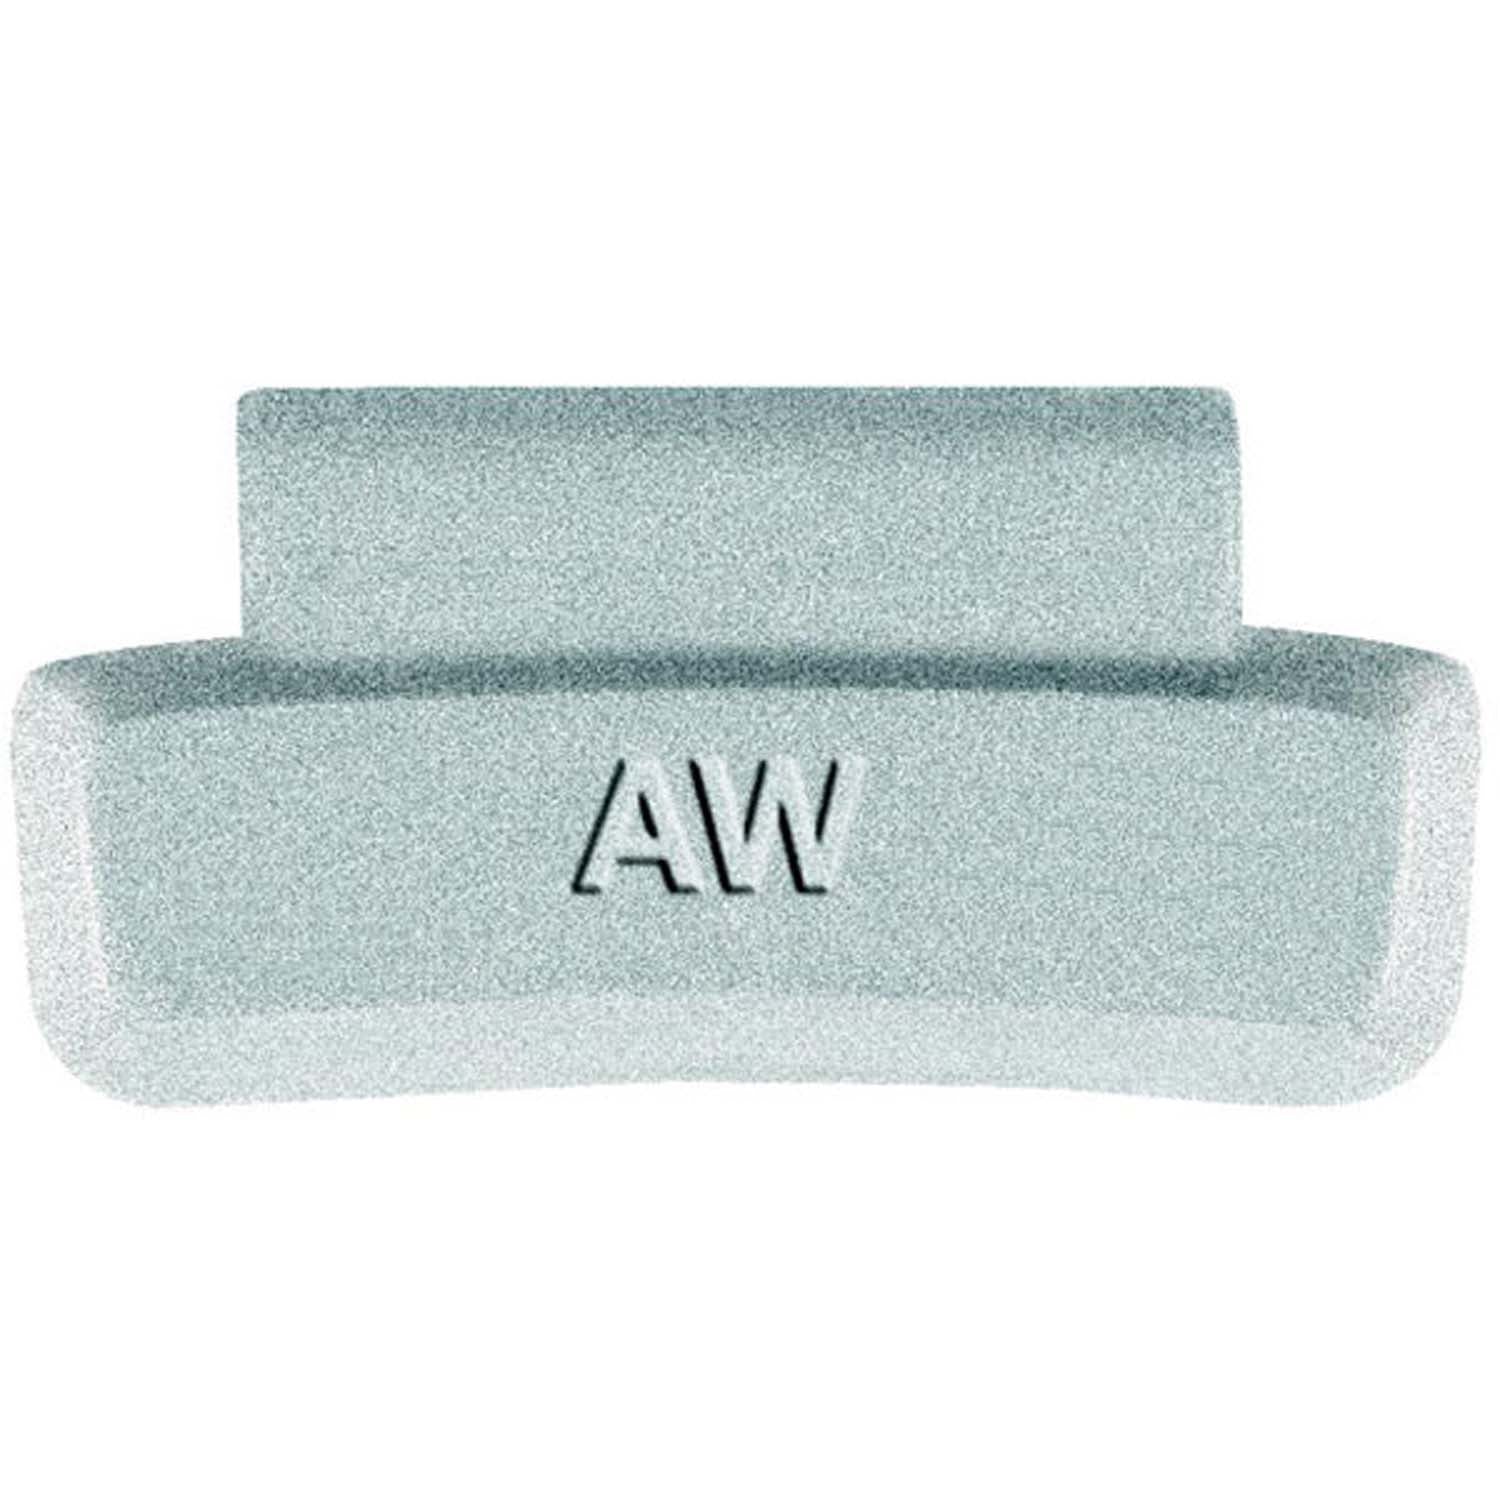 Perfect Equipment AW025N Coated Lead Wheel Weight 0.25 oz. - Box of 25